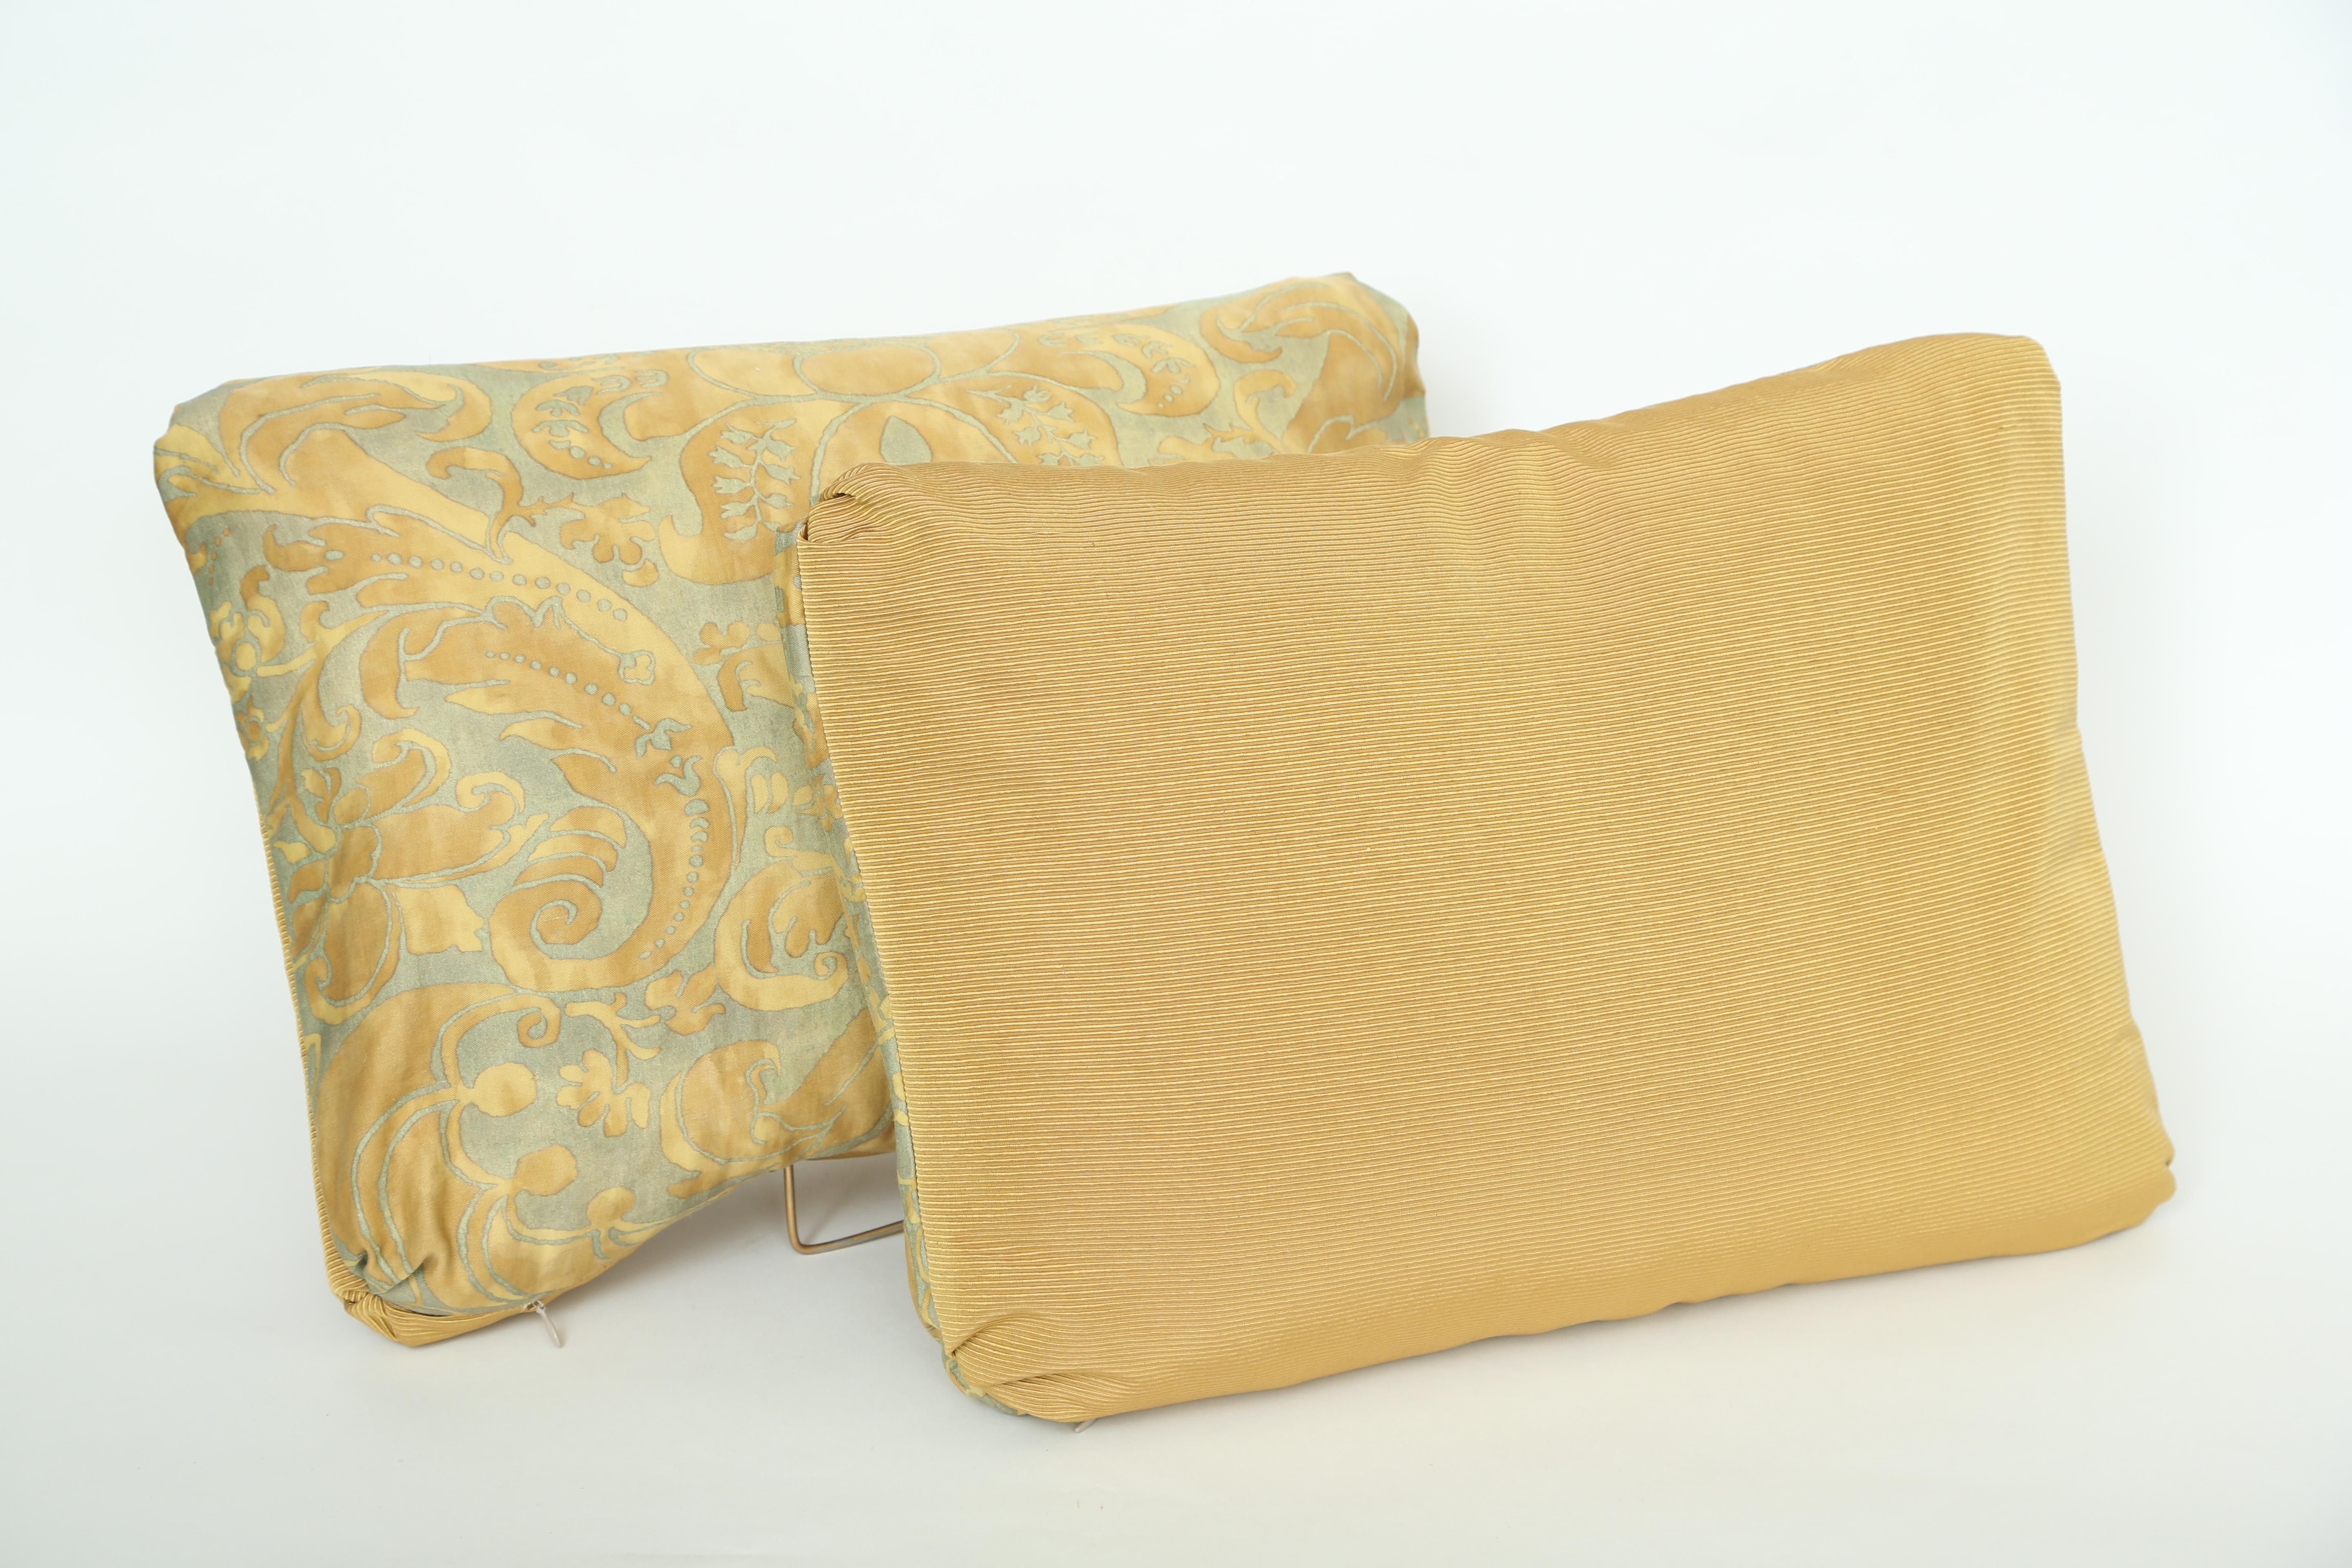 Baroque Revival A Pair of Oblong Fortuny Cushions in the Caravaggio Pattern